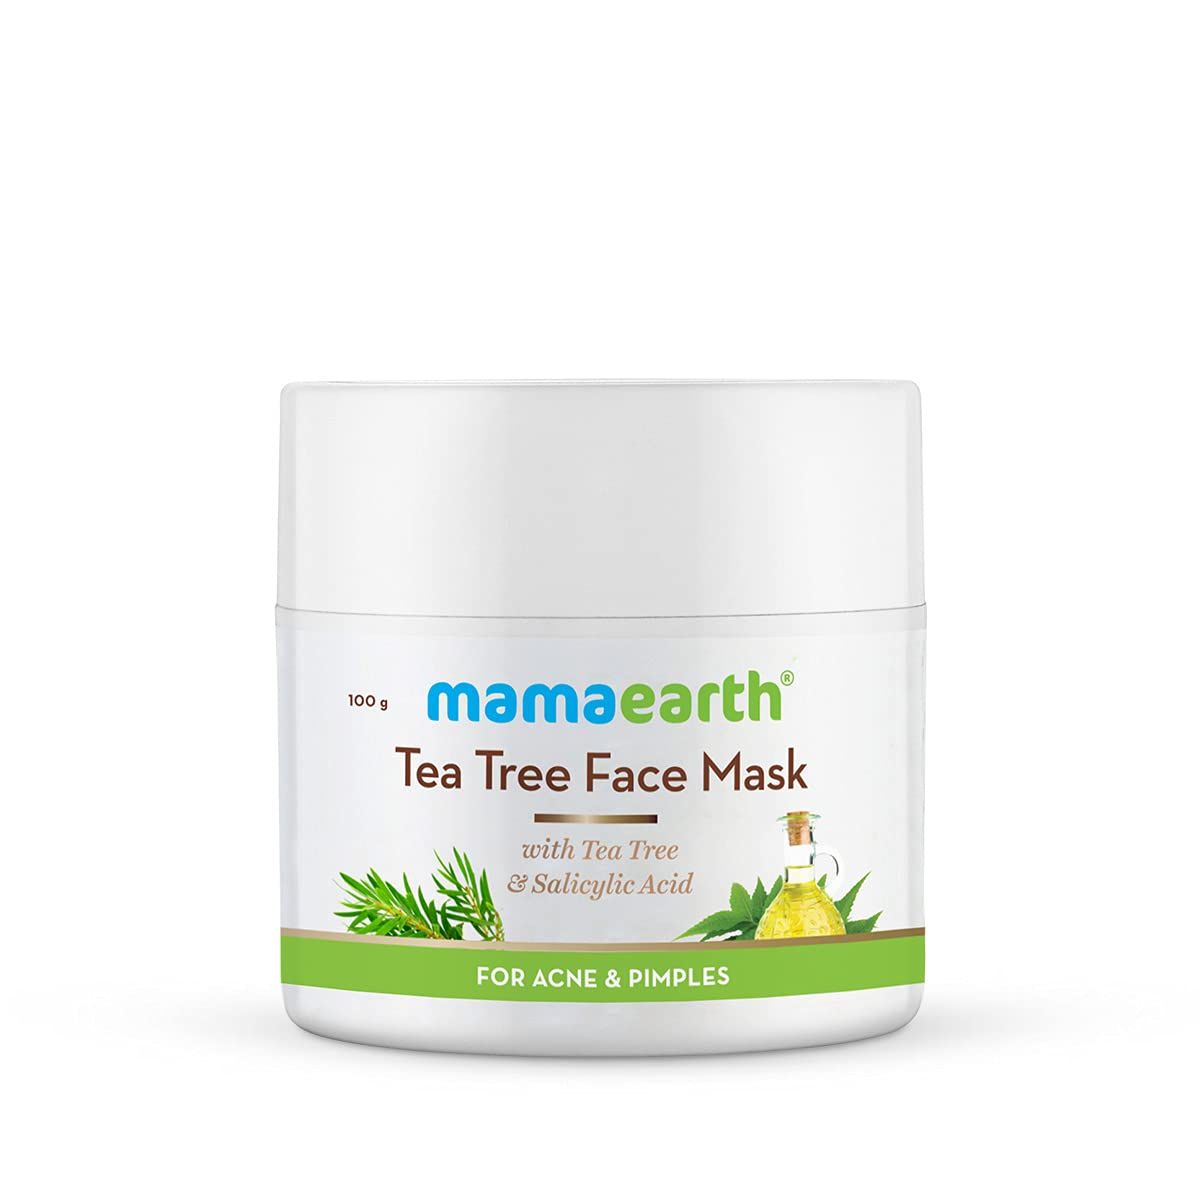 Tea Tree Face Mask for Acne, with Tea Tree and Salicylic Acid for Acne and Pimples - 100g